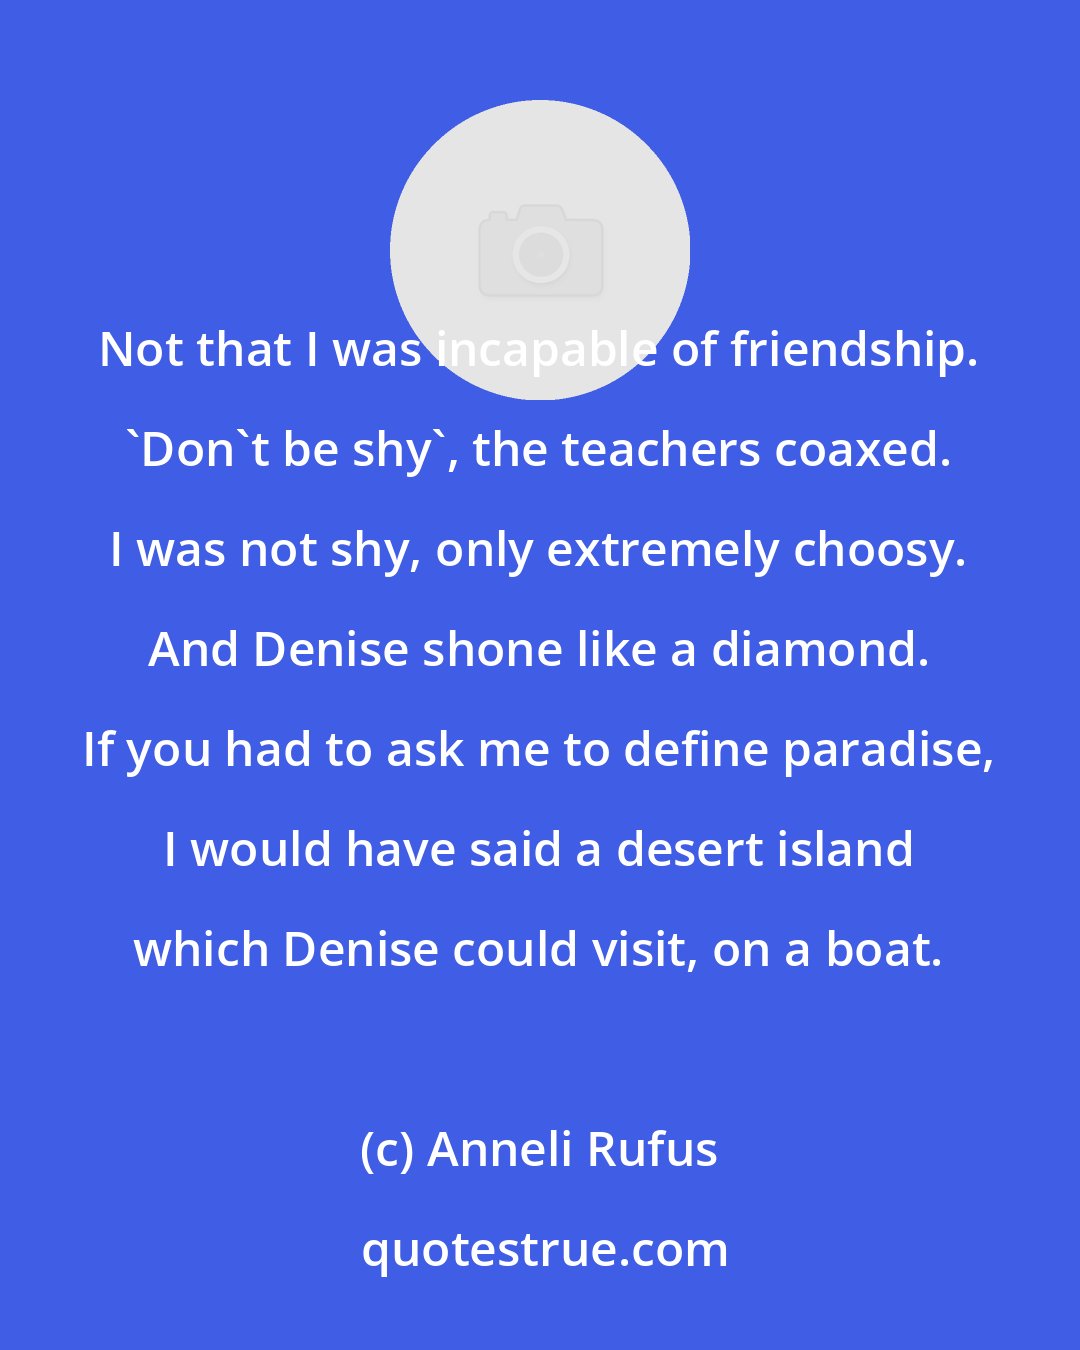 Anneli Rufus: Not that I was incapable of friendship. 'Don't be shy', the teachers coaxed. I was not shy, only extremely choosy. And Denise shone like a diamond. If you had to ask me to define paradise, I would have said a desert island which Denise could visit, on a boat.